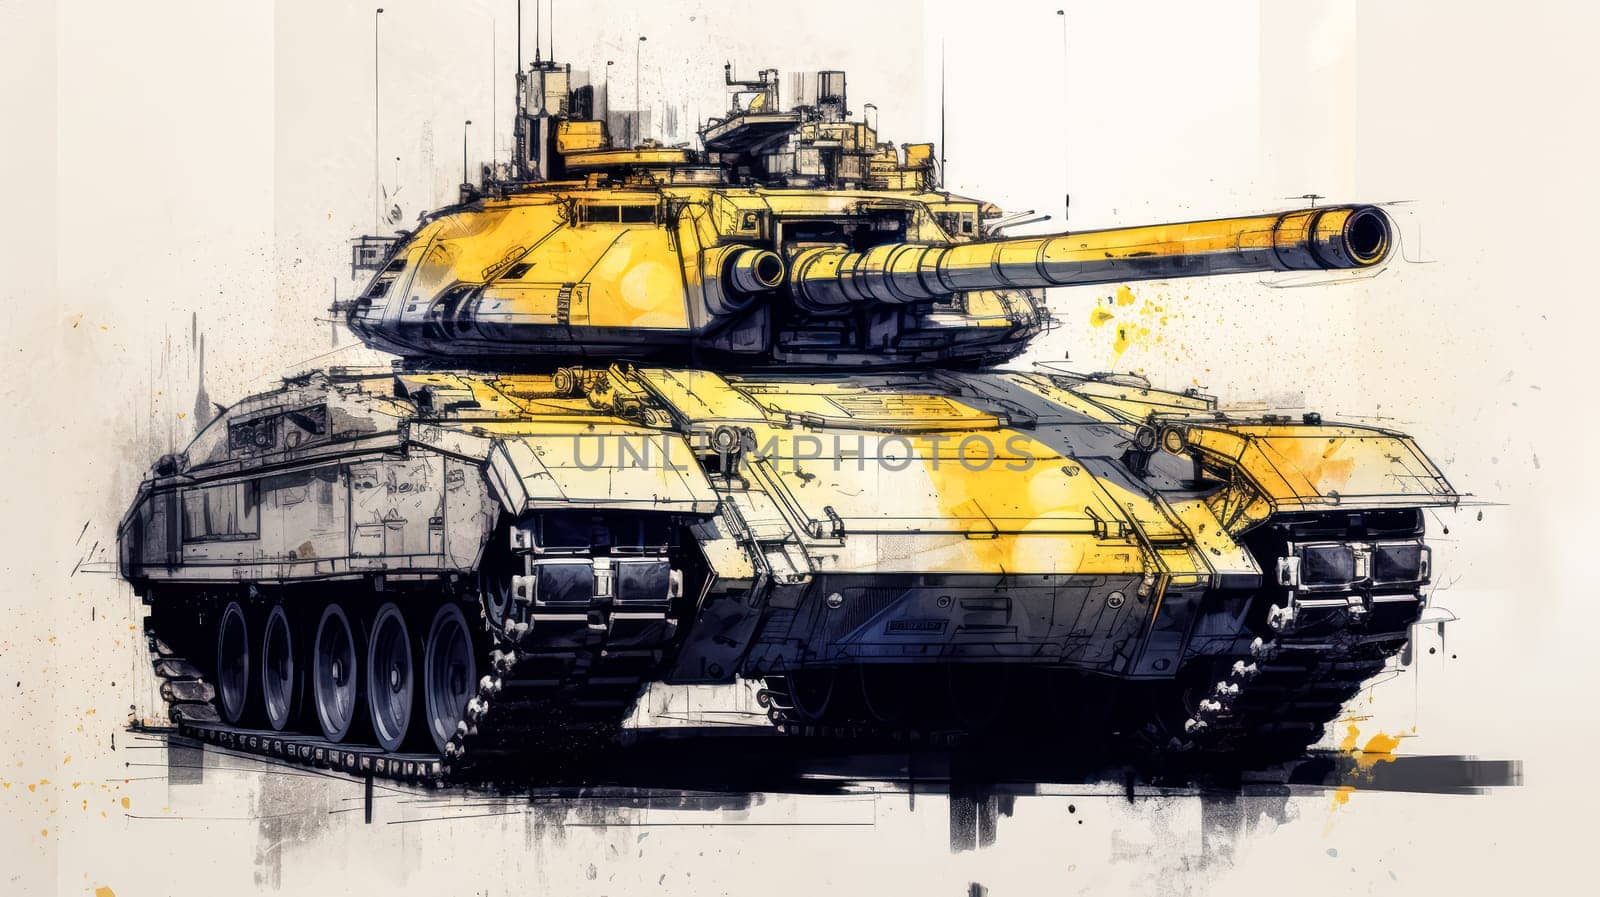 A striking watercolor sketch of a tank with yellow gray lines, showcasing military power and rugged strength in artistic detail.